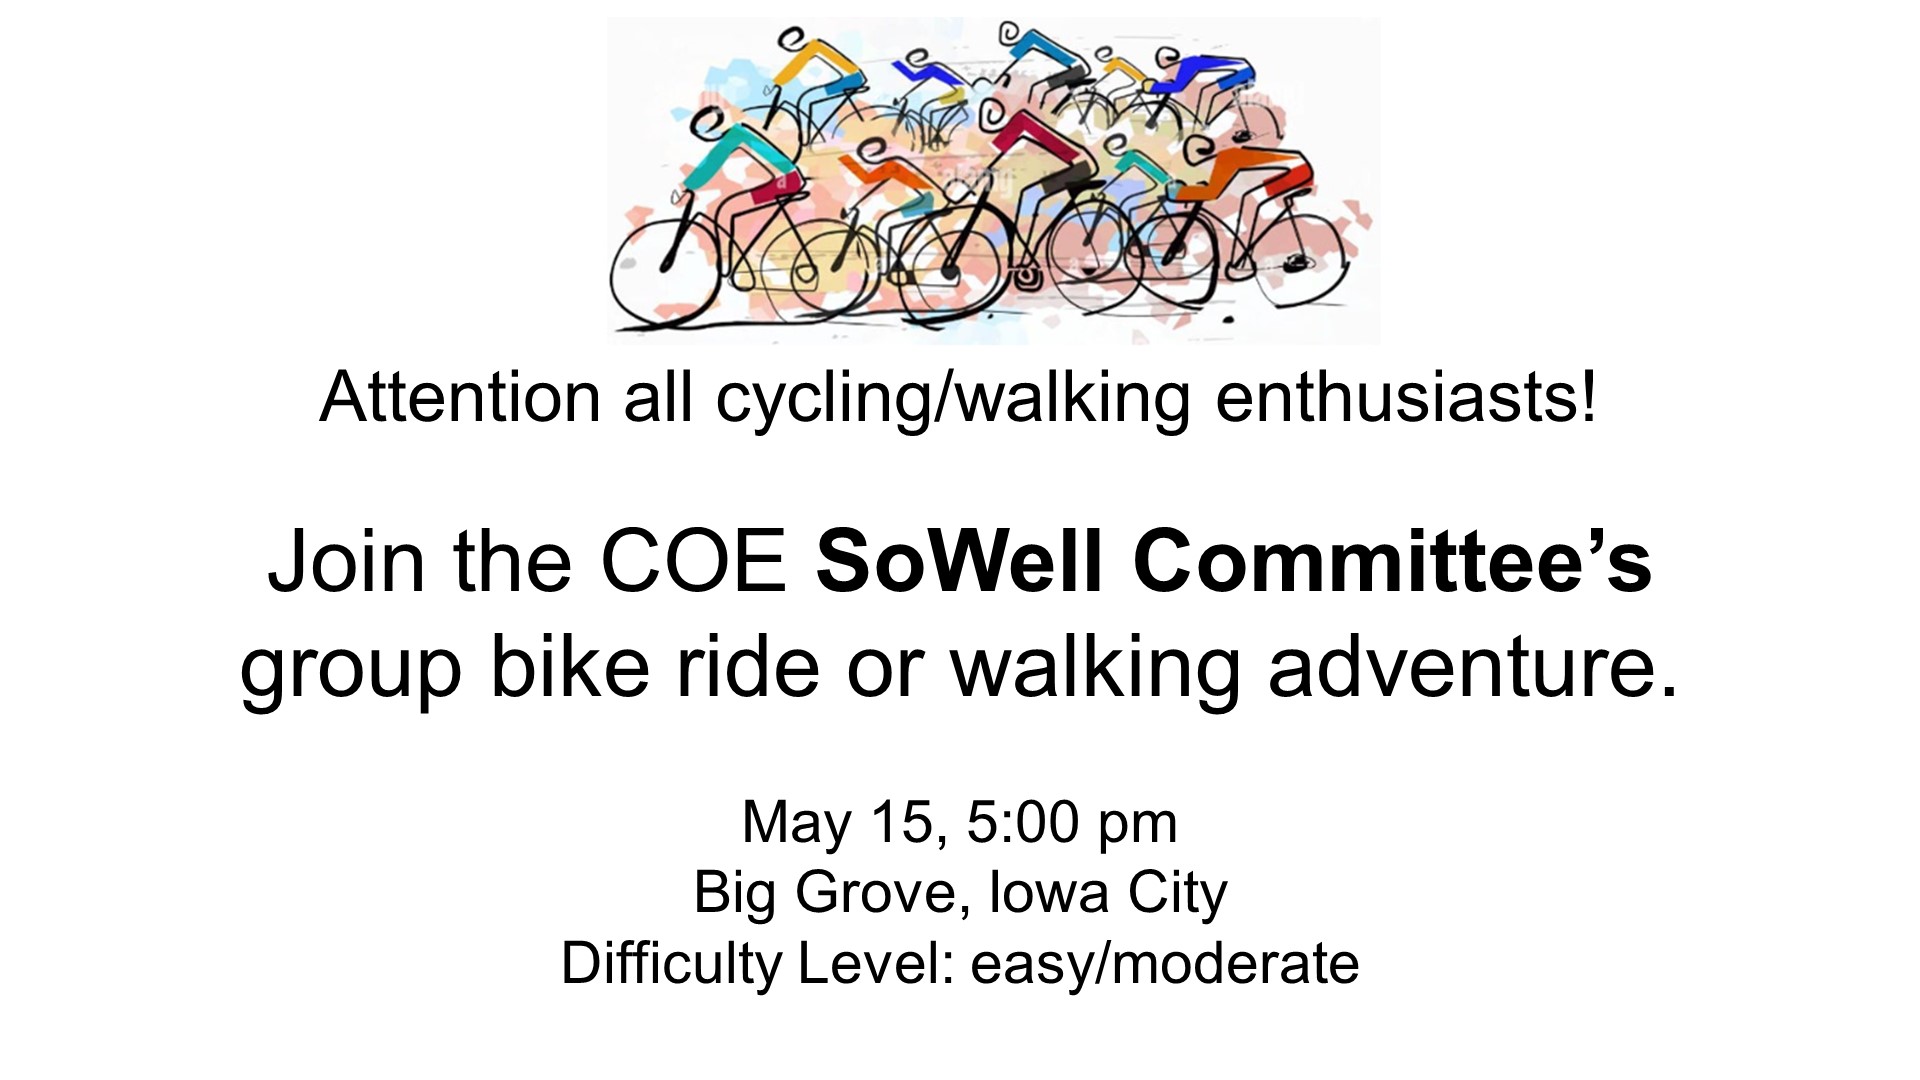 COE SoWell Committee group bike ride or walking adventure. 5/15, 5p, Big Grove, Iowa City. Difficulty level - easy/moderate